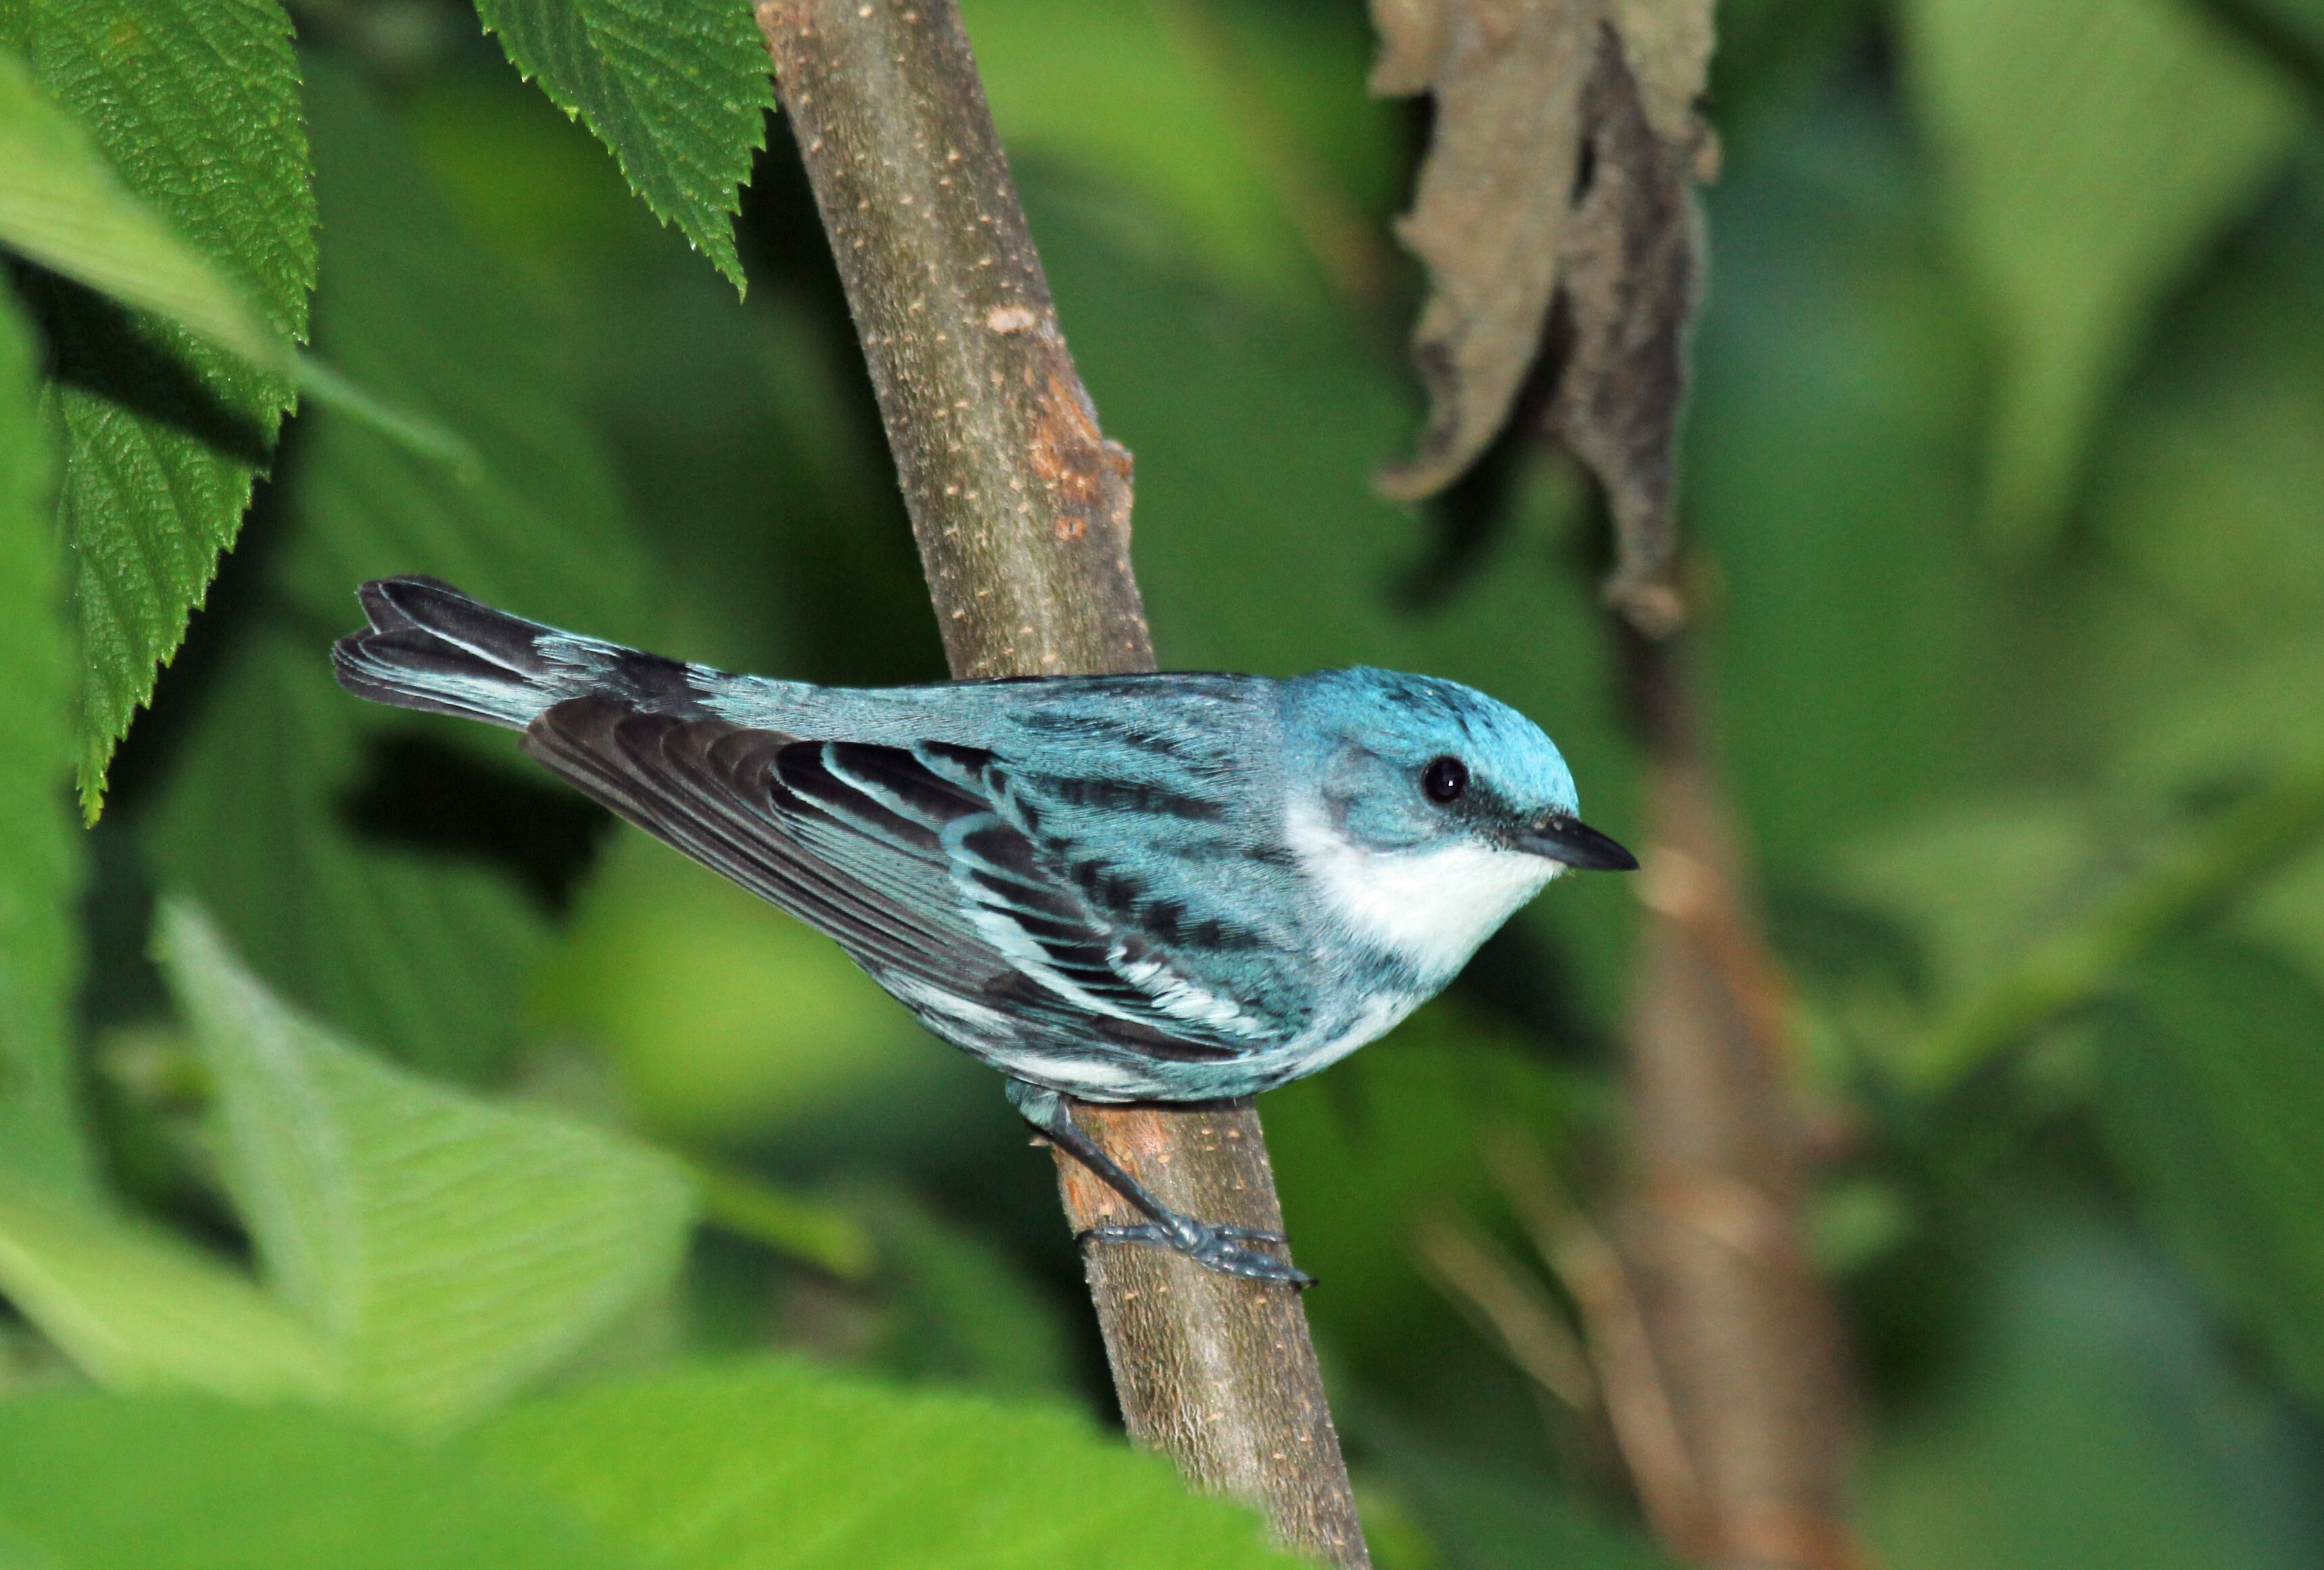 The population of Cerulean Warblers, which nest in older deciduous forests, declined 72 percent between 1970 and 2014, according to Partners in Flight. <a href="https://www.flickr.com/photos/warblerlady/14483004972/" target="_blank" >Photo</a>: Melanie C. Underwood/<a href="https://creativecommons.org/licenses/by-nd/2.0/" target="_blank" >CC BY-ND 2.0</a>